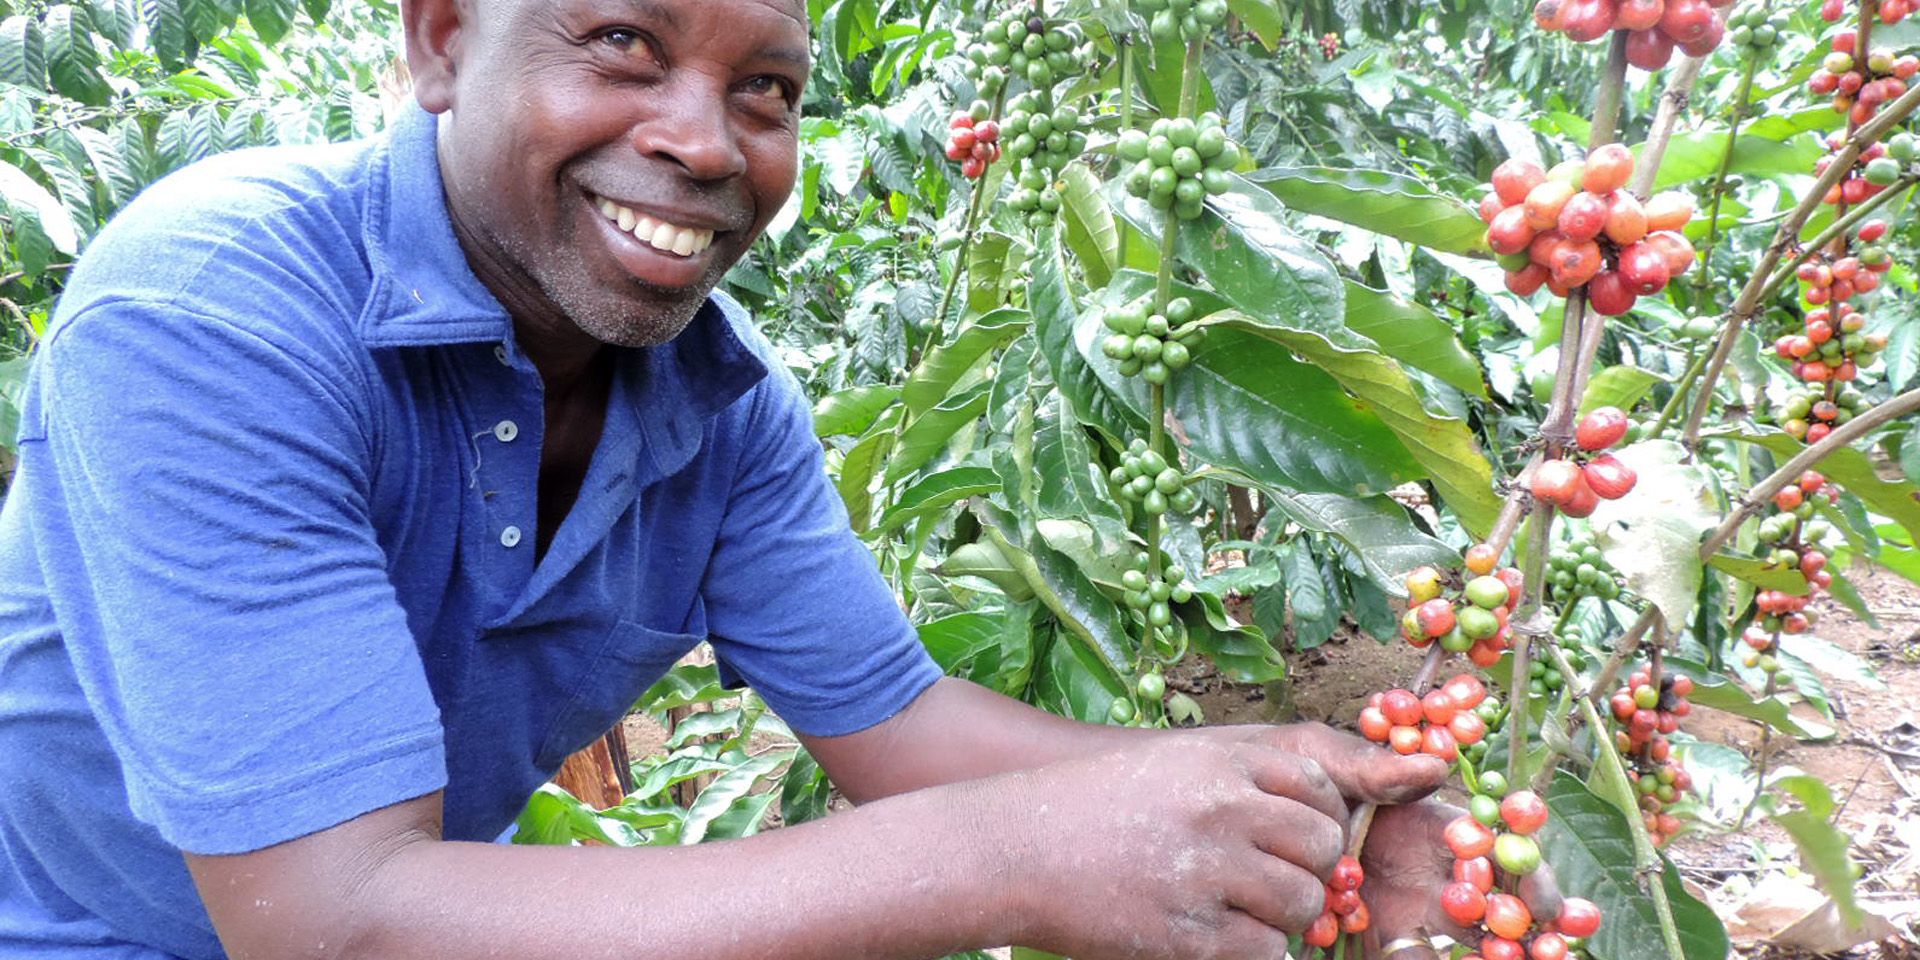 A smiling man holding a vine covered with red-tinted fruits.